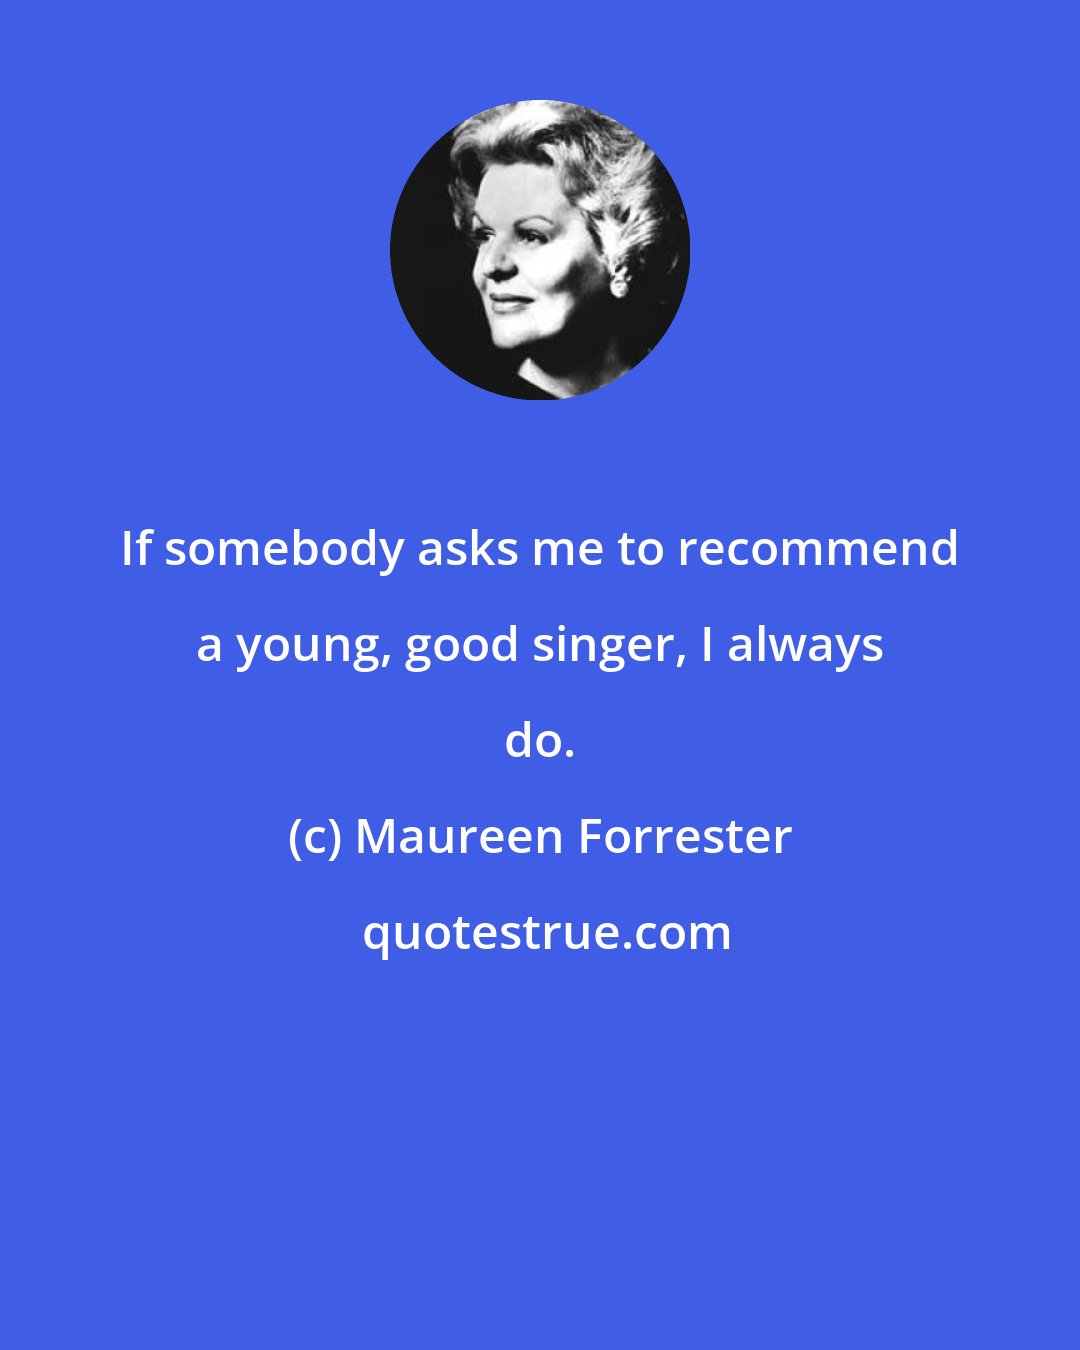 Maureen Forrester: If somebody asks me to recommend a young, good singer, I always do.